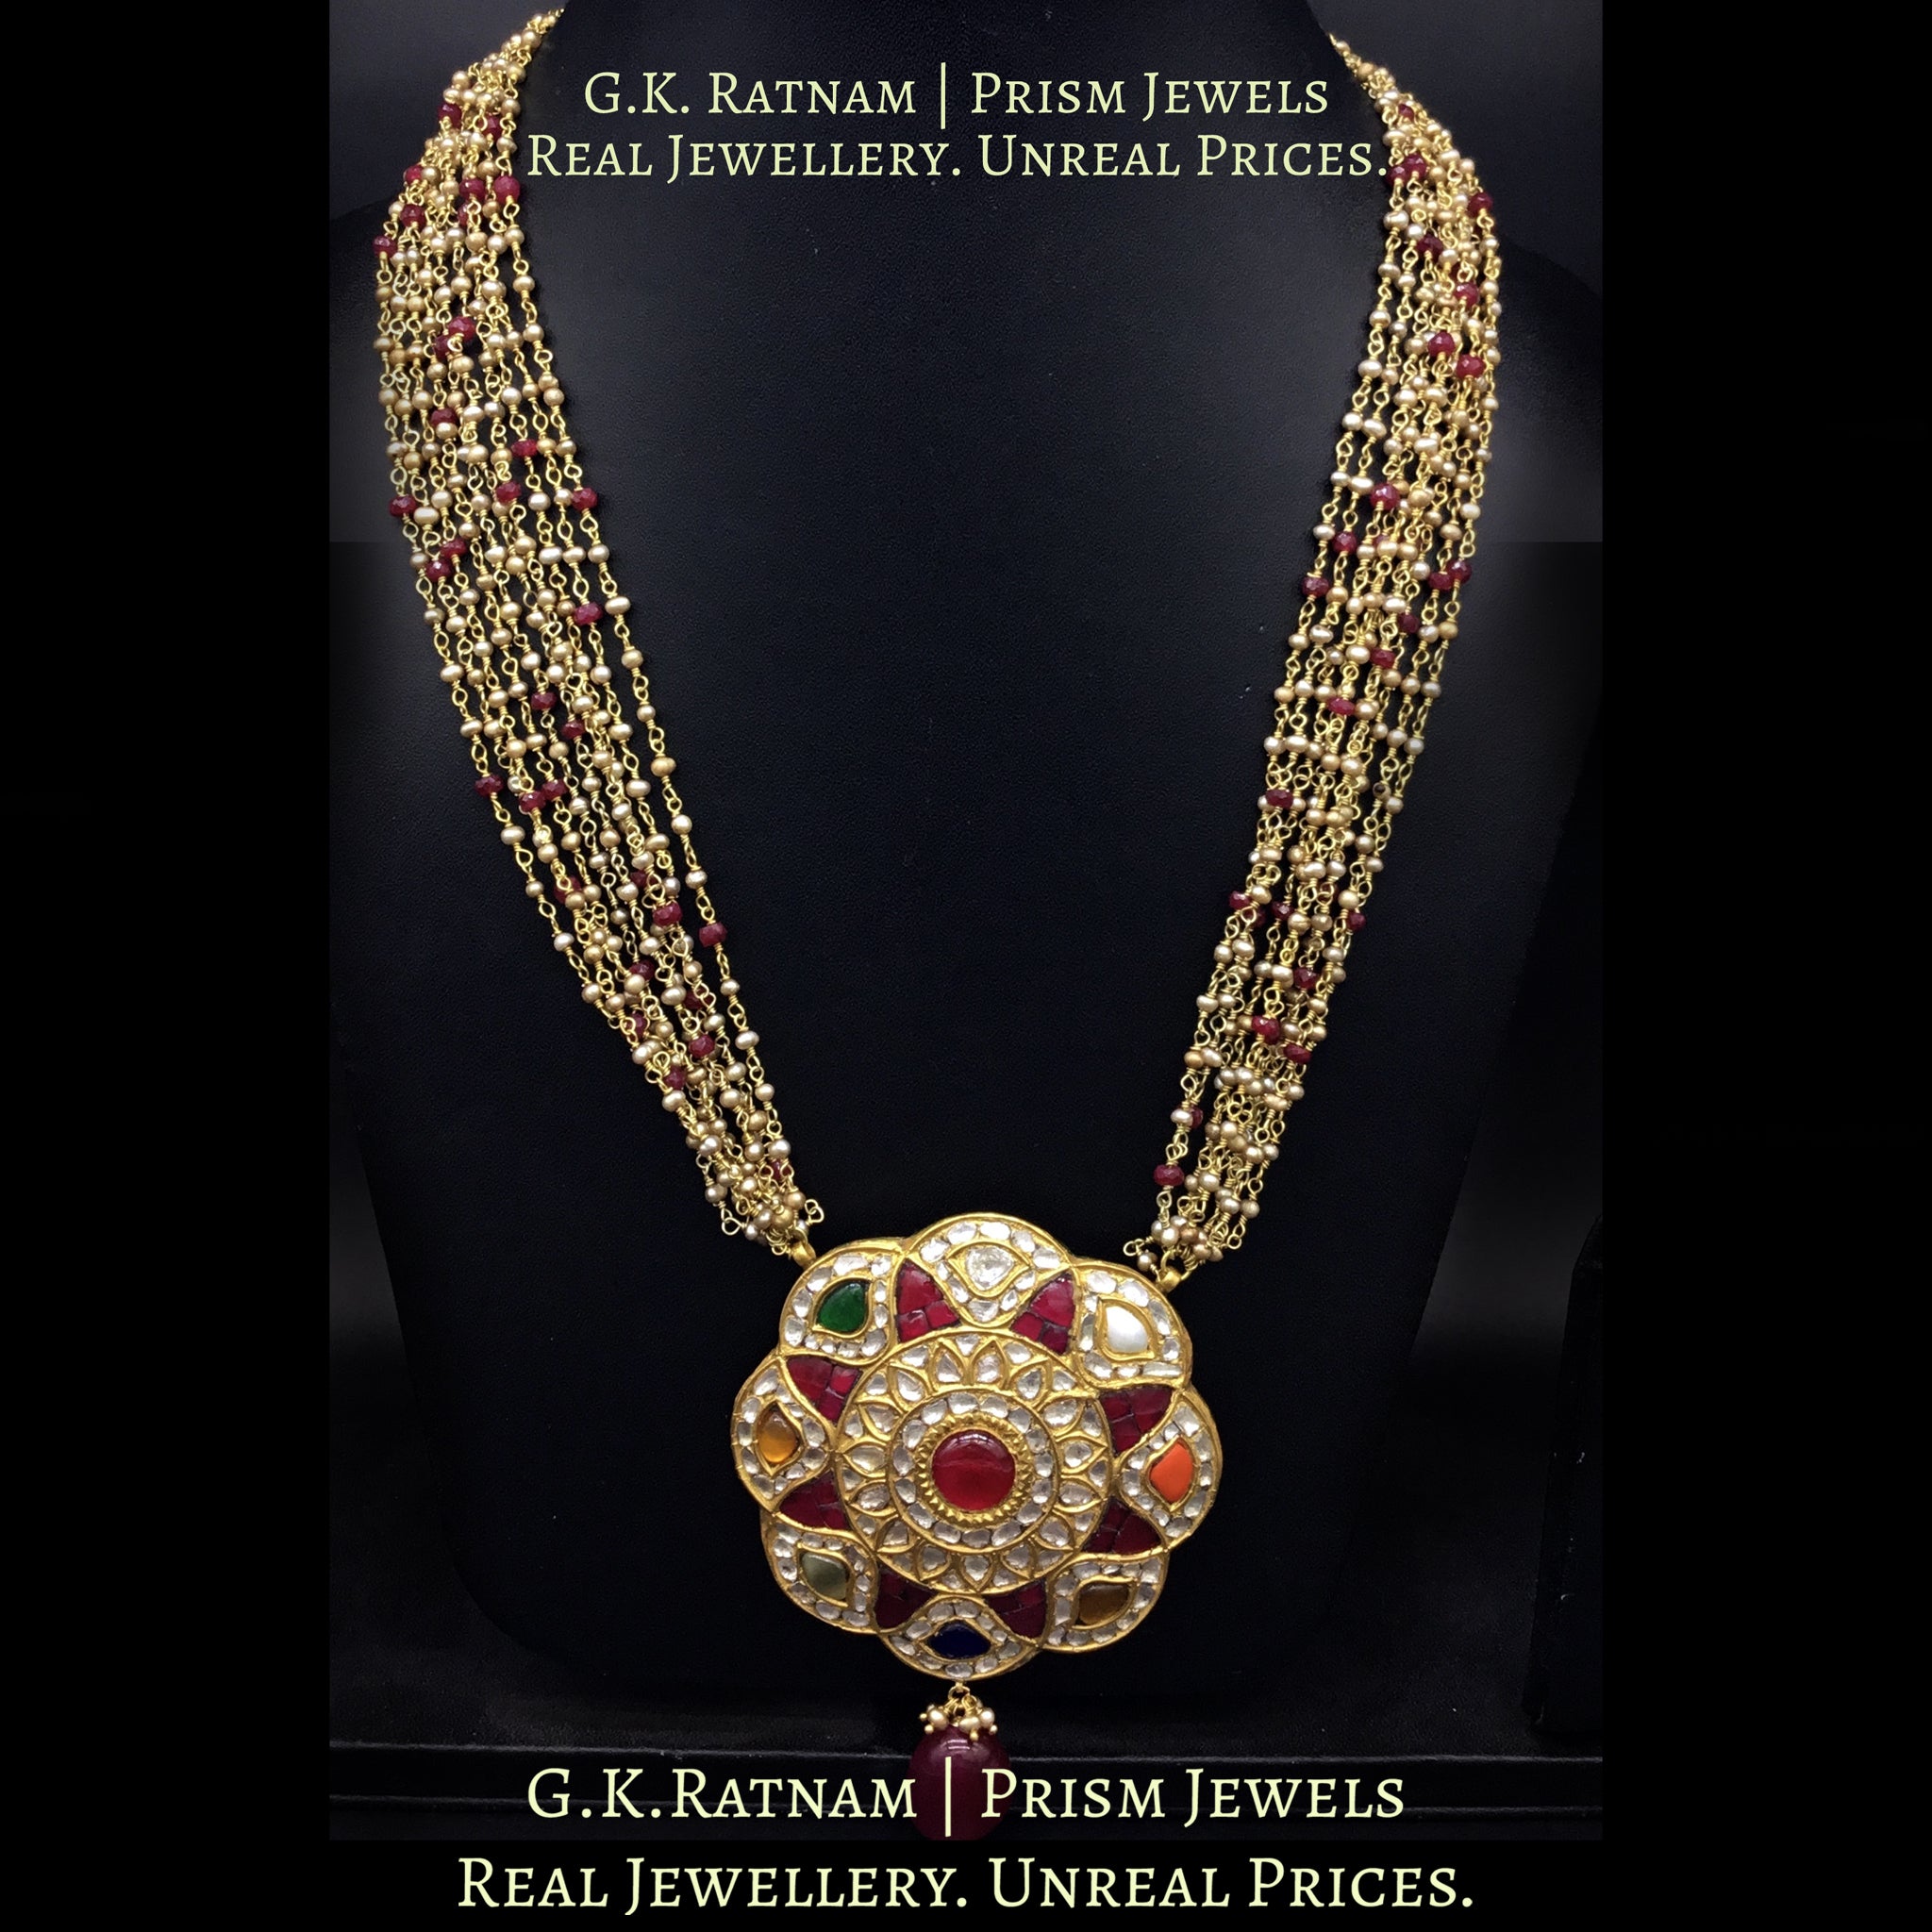 23k Gold and Diamond Polki Navratna floral Pendant with Antique Hyderabadi Pearl Chains